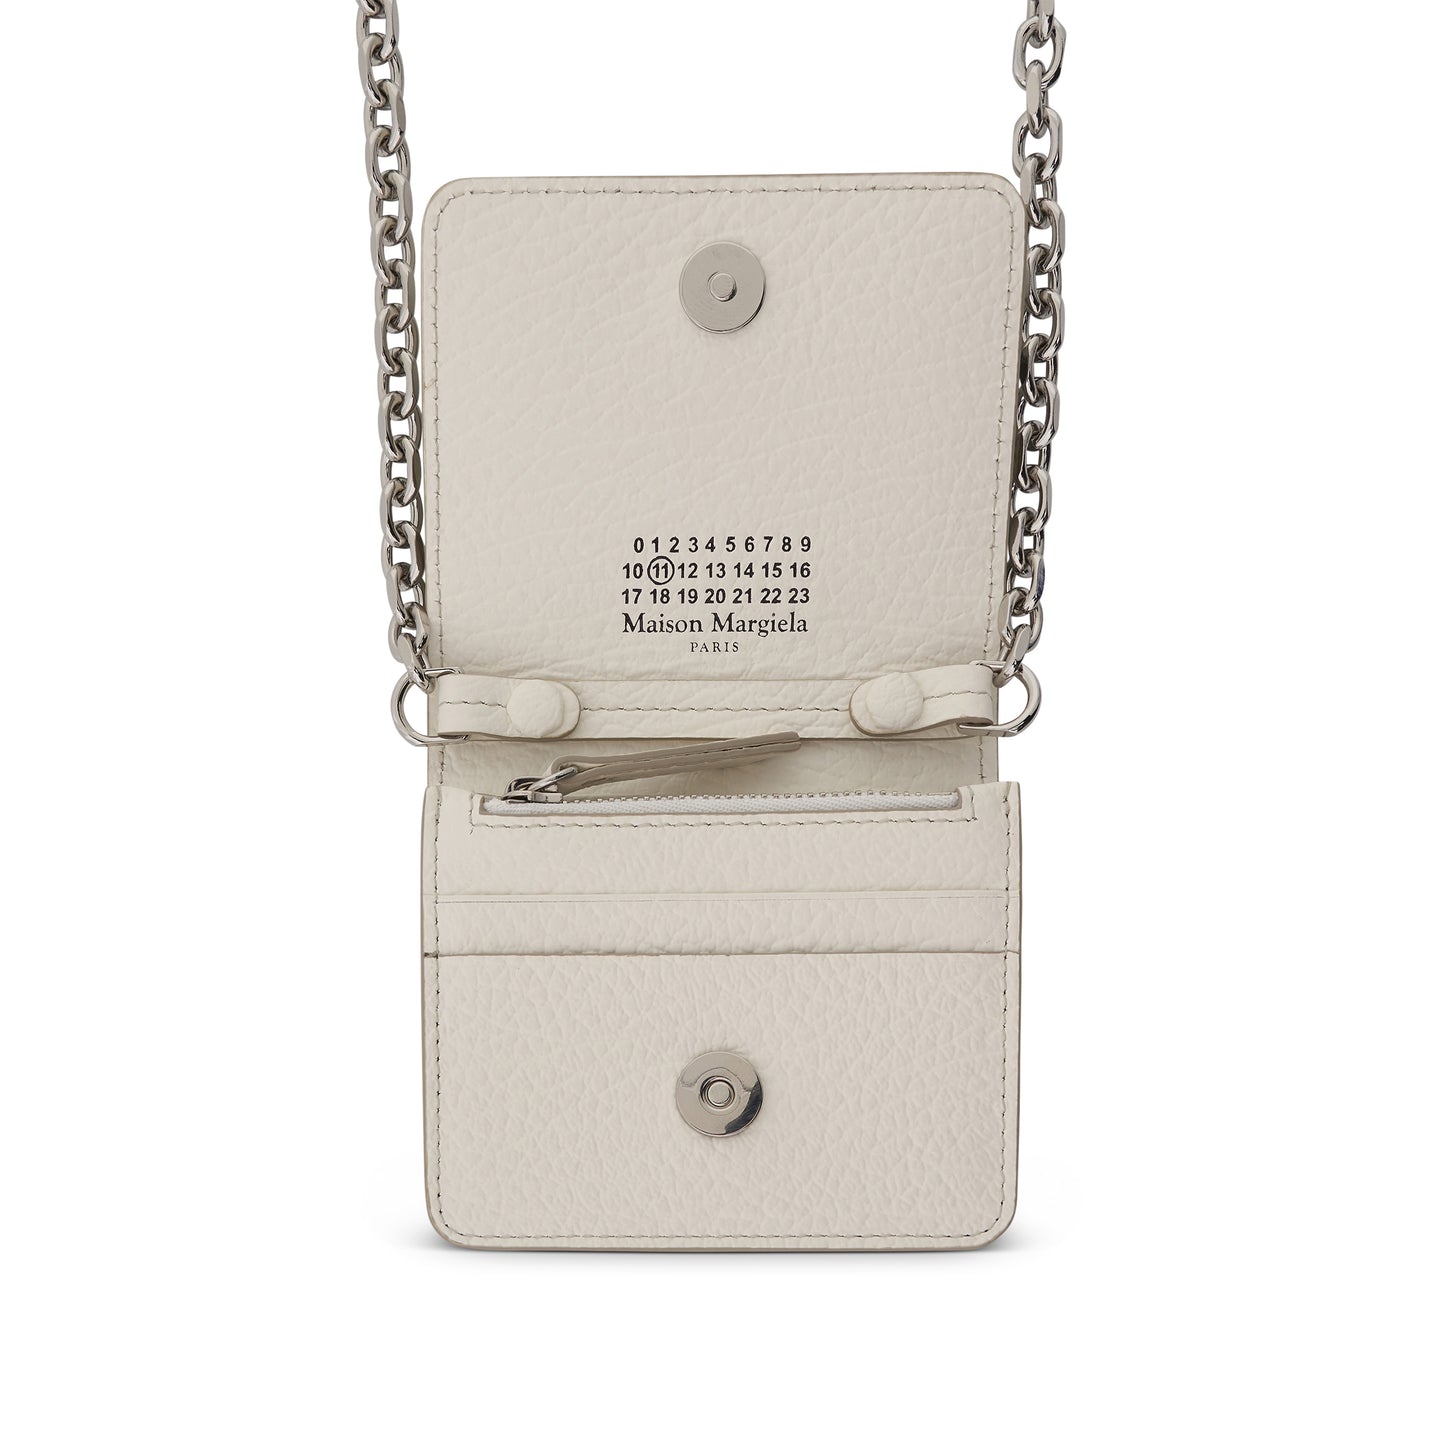 Four Stitches Chain Wallet in White